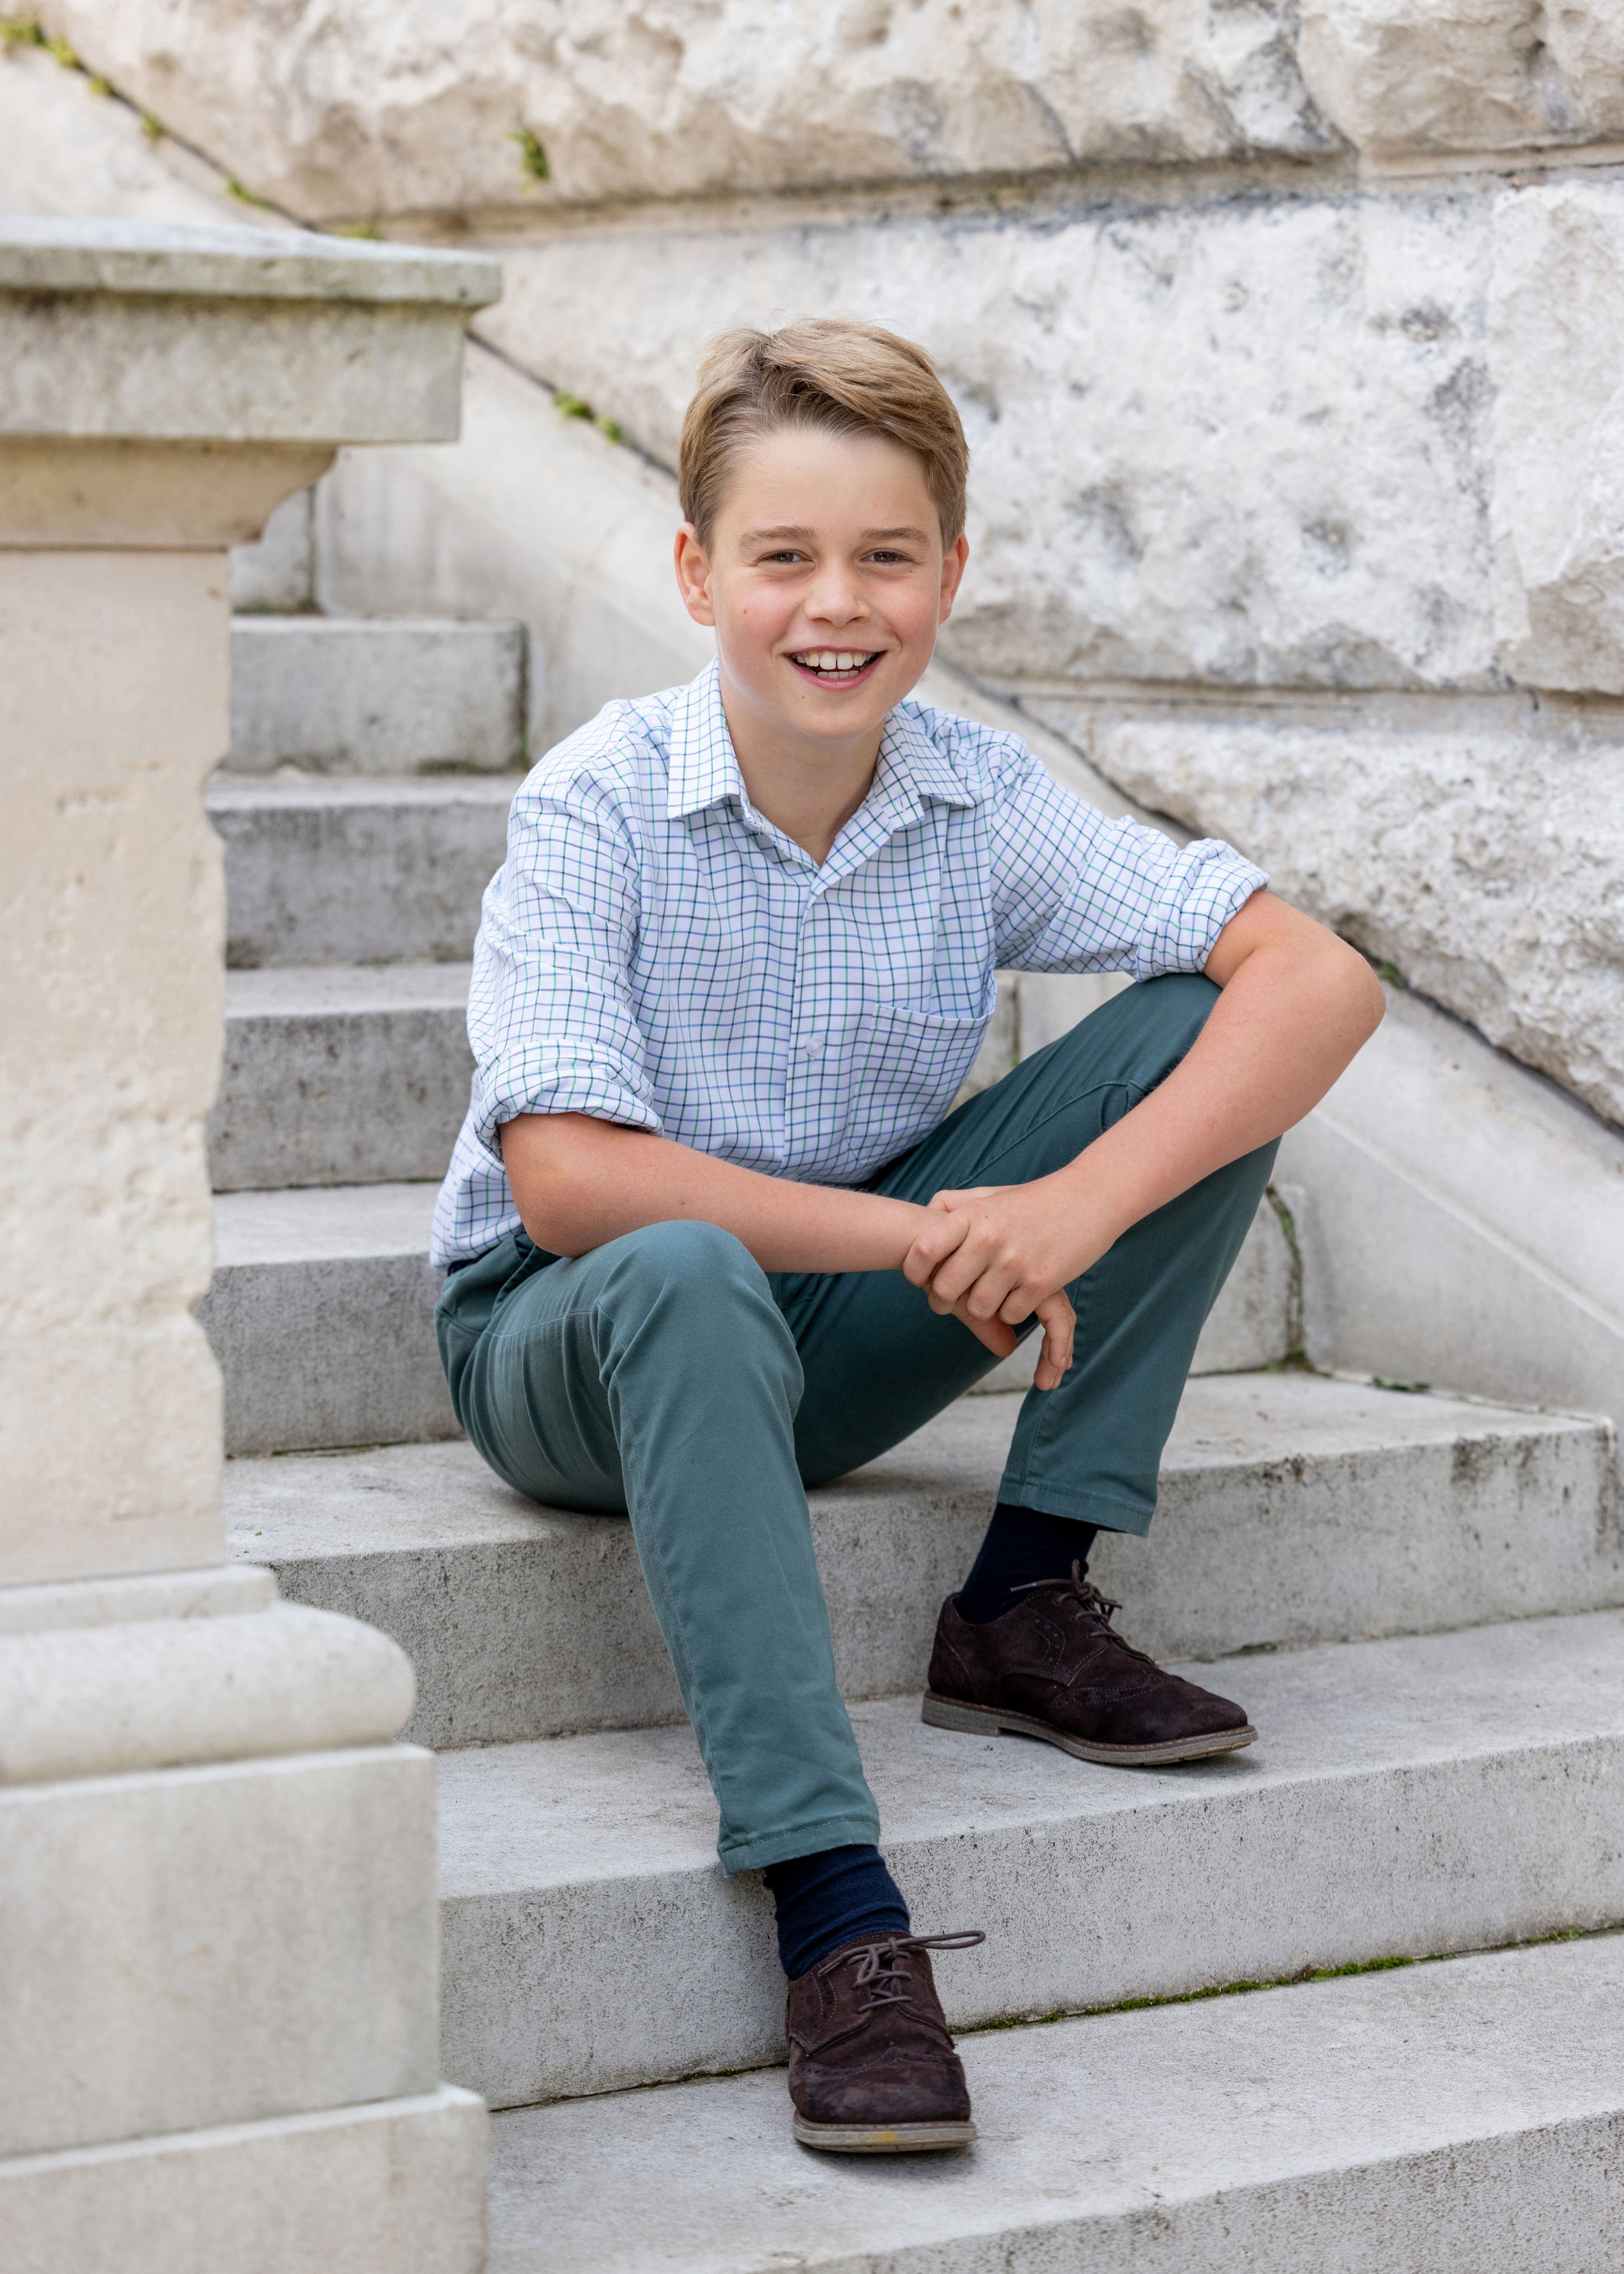 <p><span>In honor of Prince George's 10th birthday in July 2023, Kensington Palace released a new portrait of the future king that was taken in Windsor, England, to mark his milestone day.</span></p><p>MORE: <a href="https://www.wonderwall.com/celebrity/royals/princess-kate-middleton-best-photos-first-days-as-new-princess-of-wales-658140.gallery">See the best photos of Kate Middleton in her first year as the new Princess of Wales</a></p>